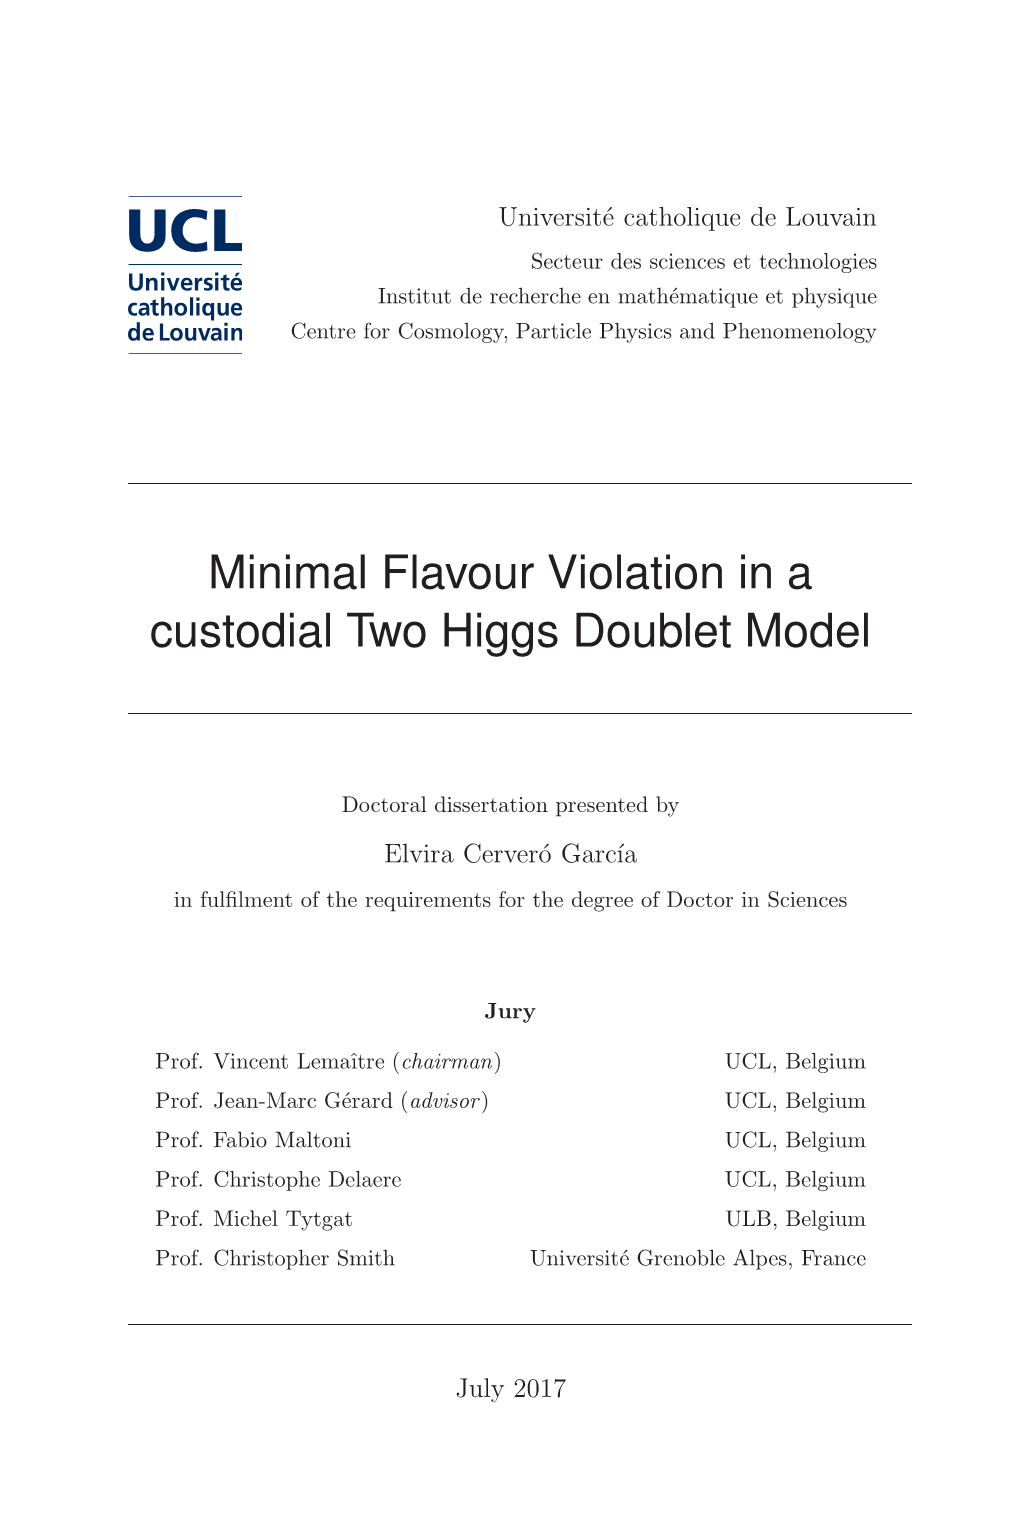 Minimal Flavour Violation in a Custodial Two Higgs Doublet Model